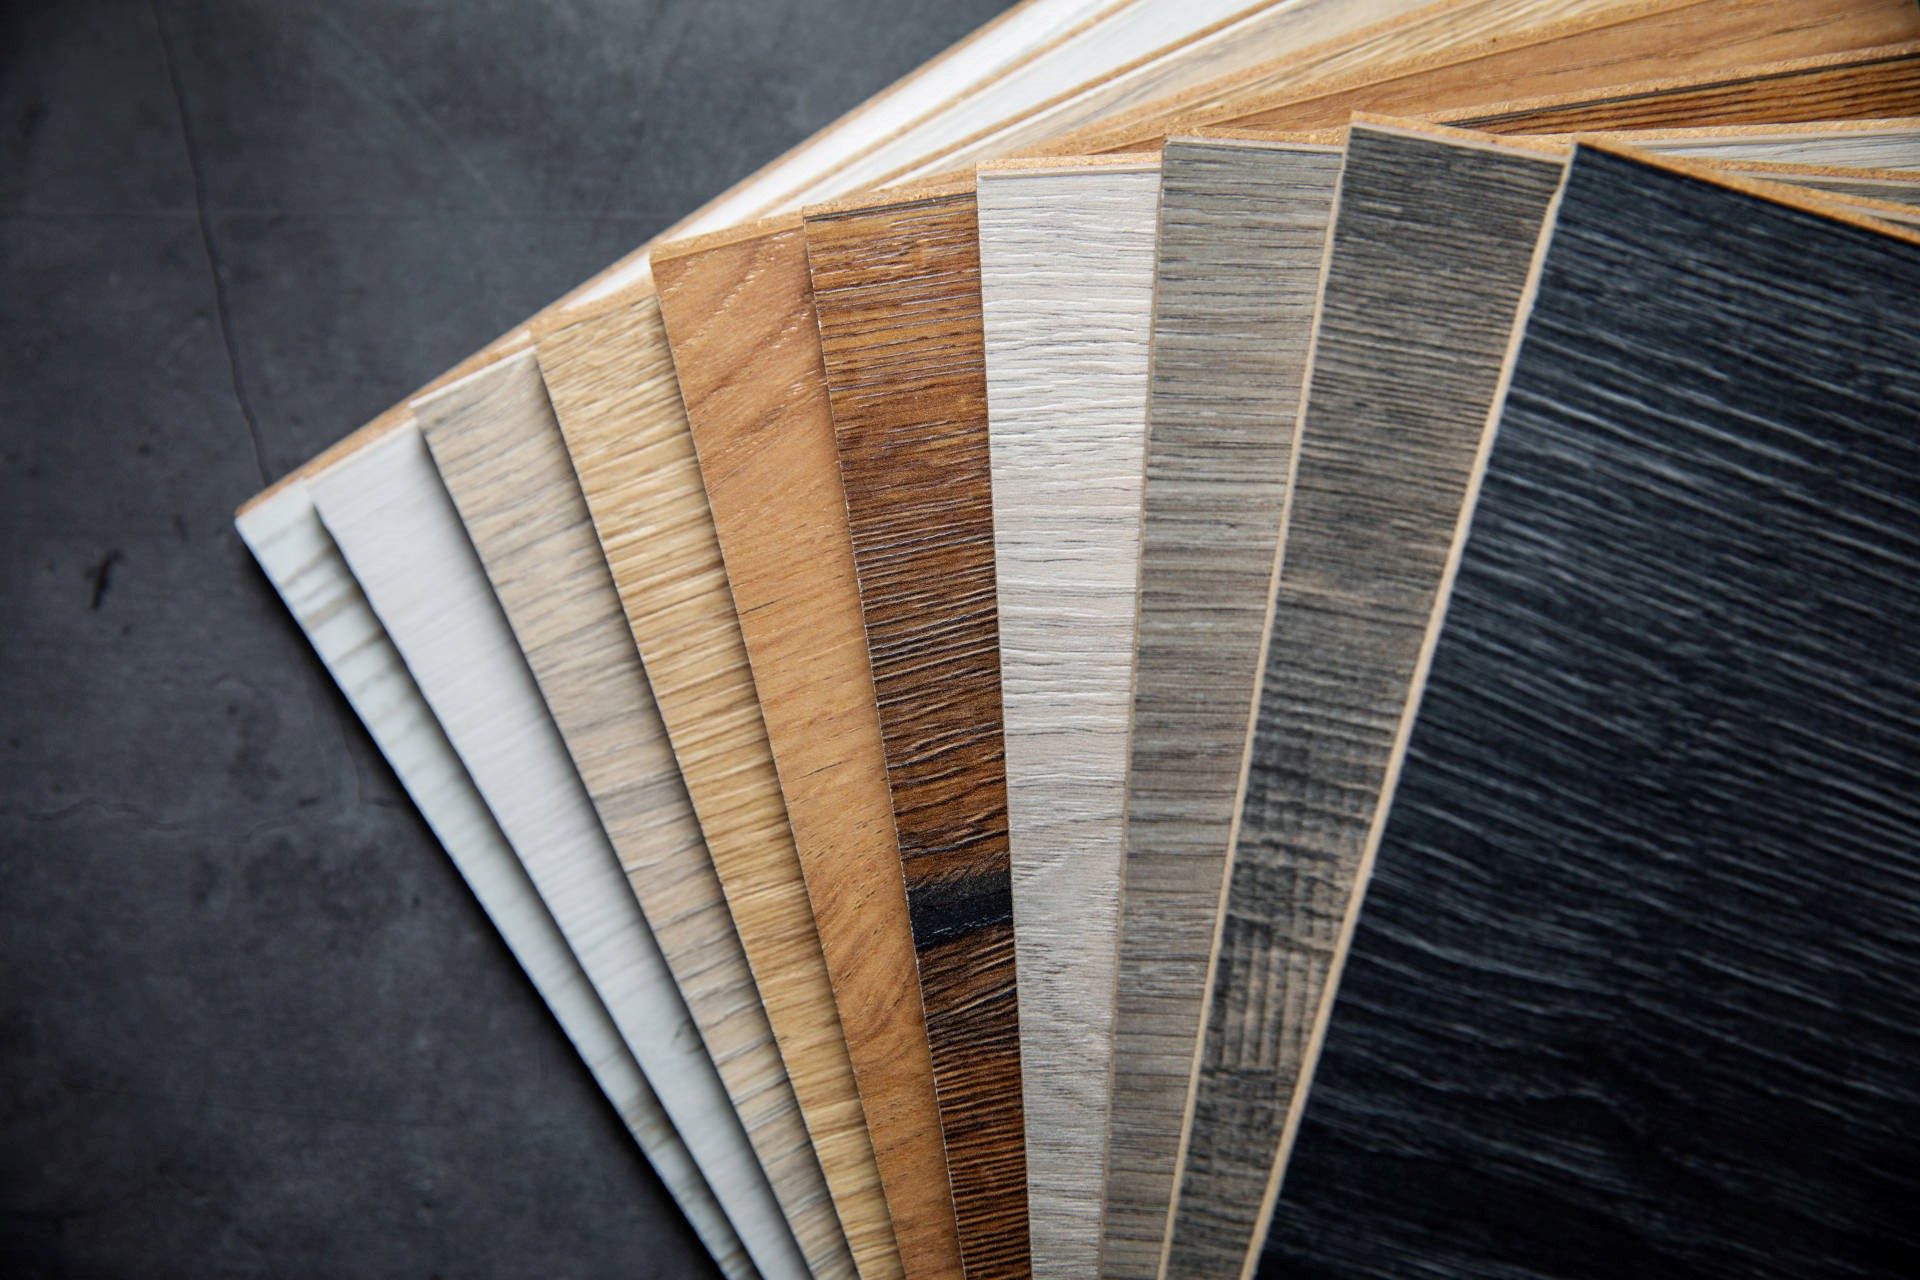 Laminate flooring samples in a range of stains.